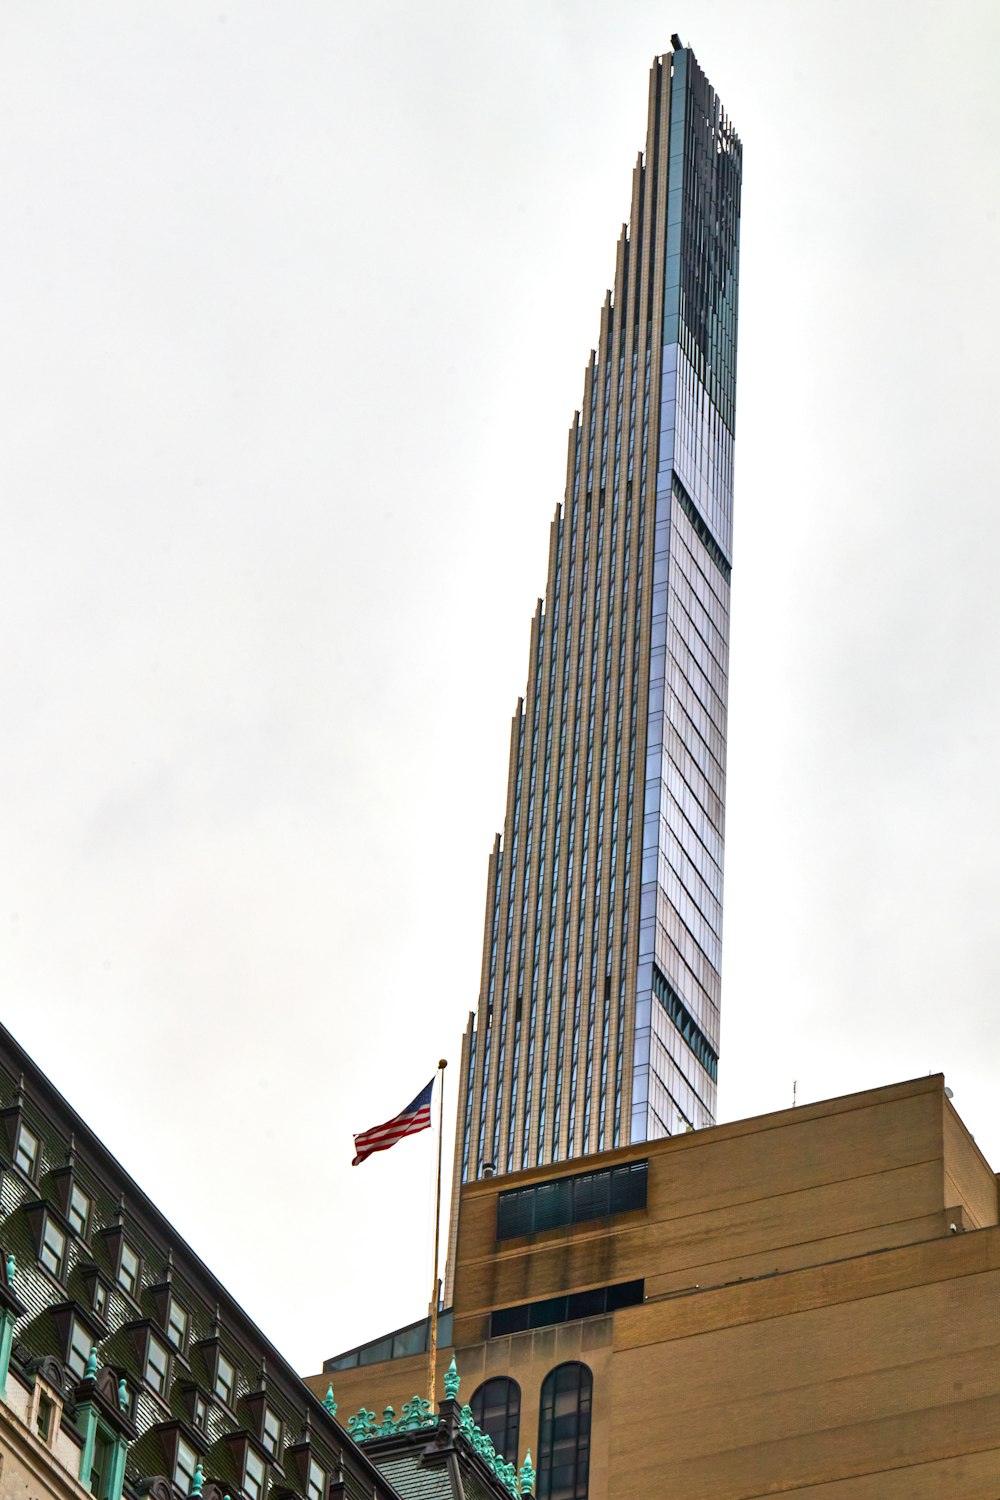 a tall building with a flag on top of it